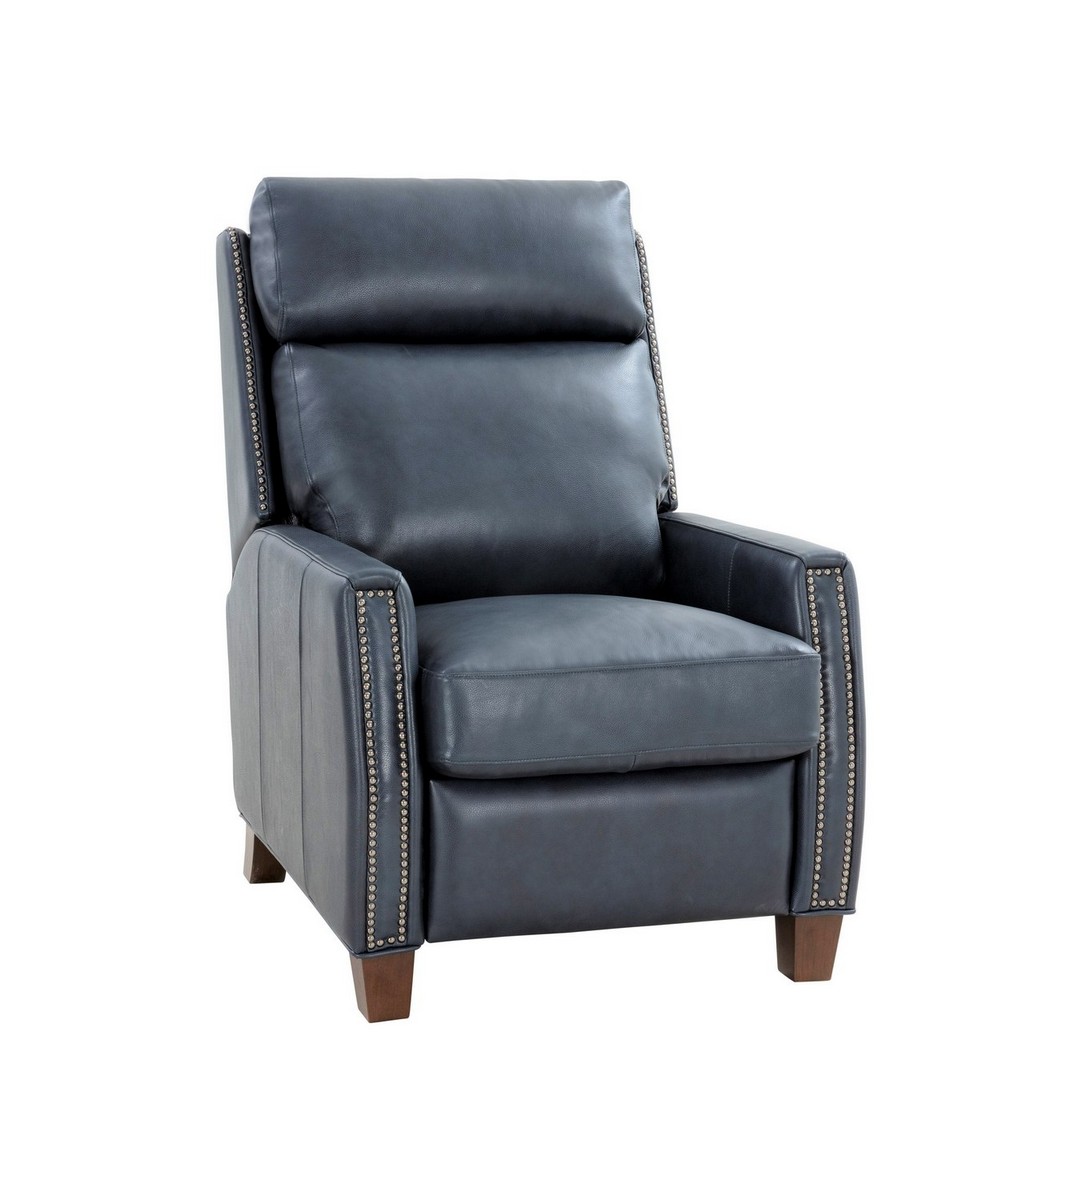 Barcalounger Anaheim Big and Tall Recliner Chair - Barone Navy Blue/All Leather